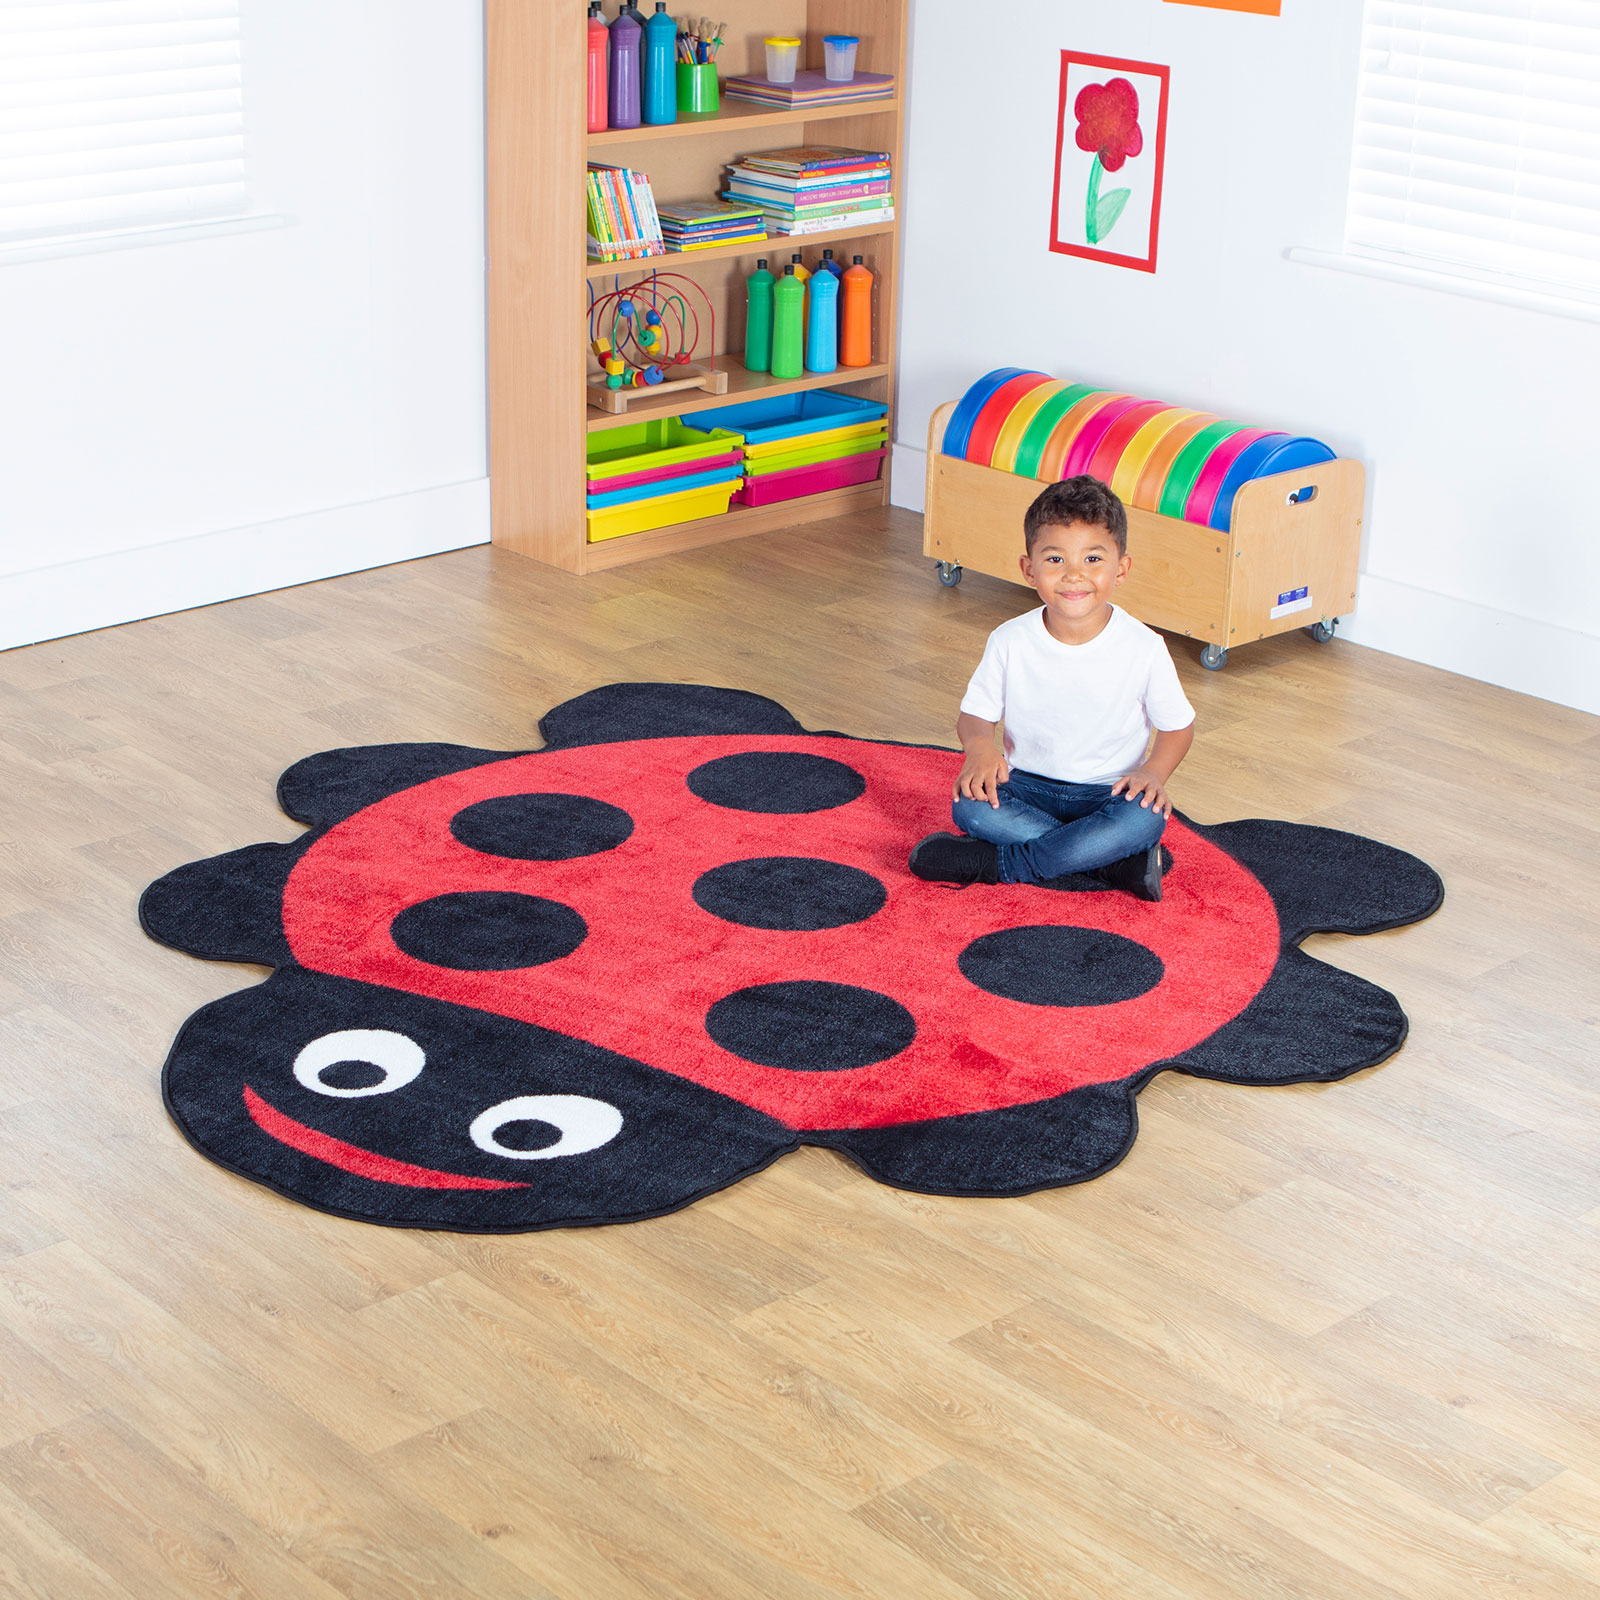 Back to Nature Ladybird Shaped Indoor Carpet